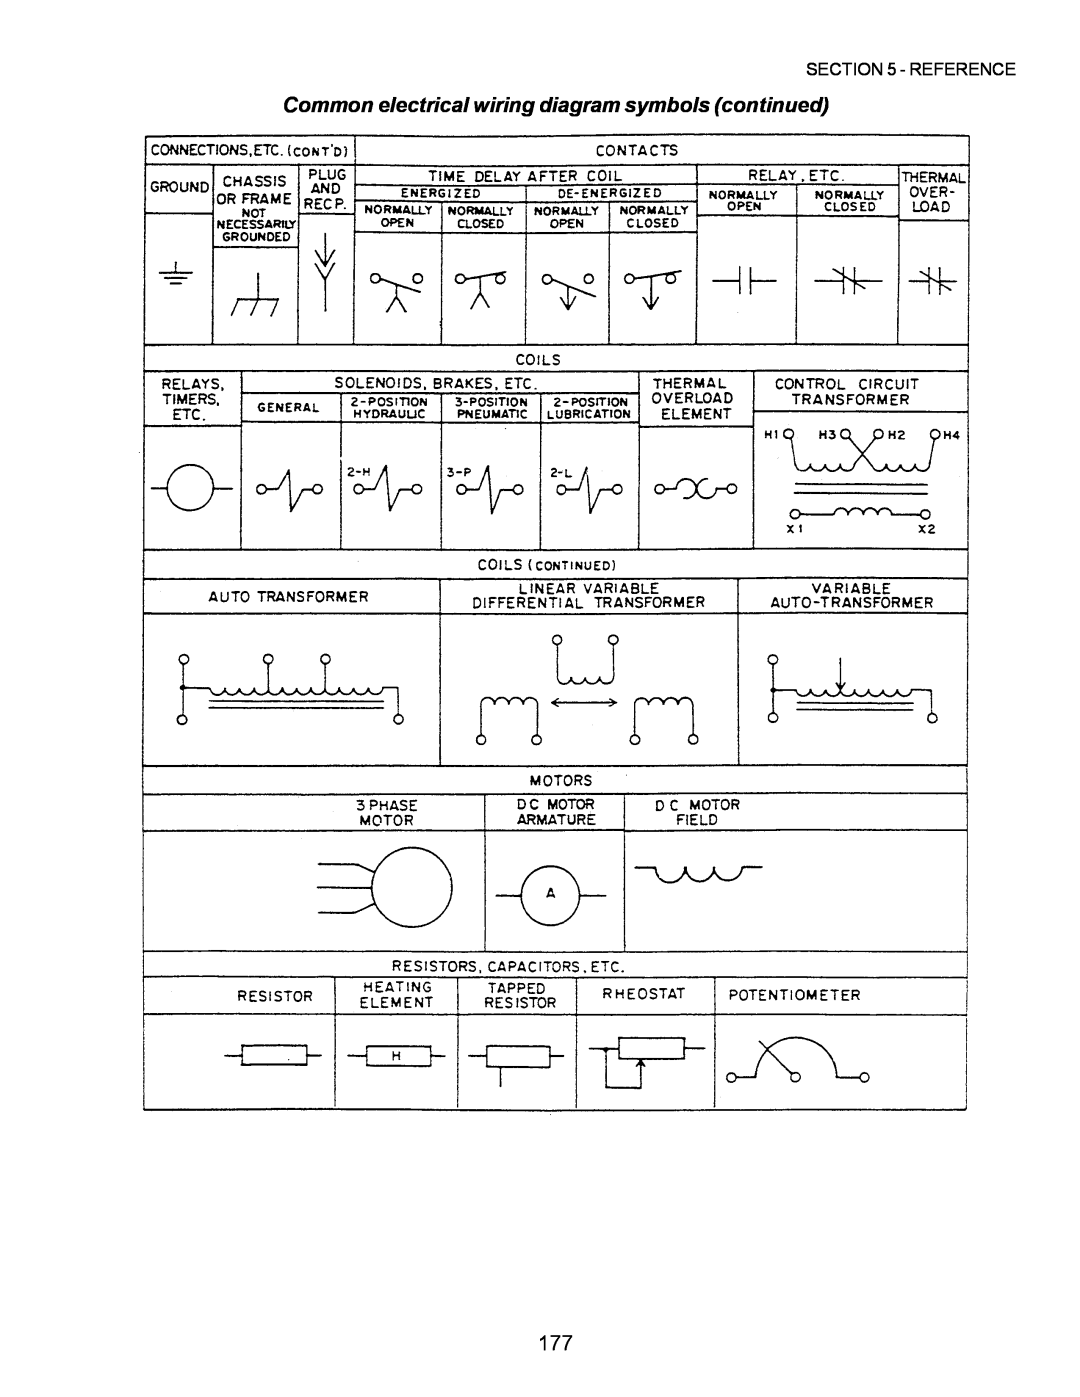 Middleby Marshall PS220, PS570, PS360, PS200, PS555, PS224 PS310 Common electrical wiring diagram symbols continued, Reference 